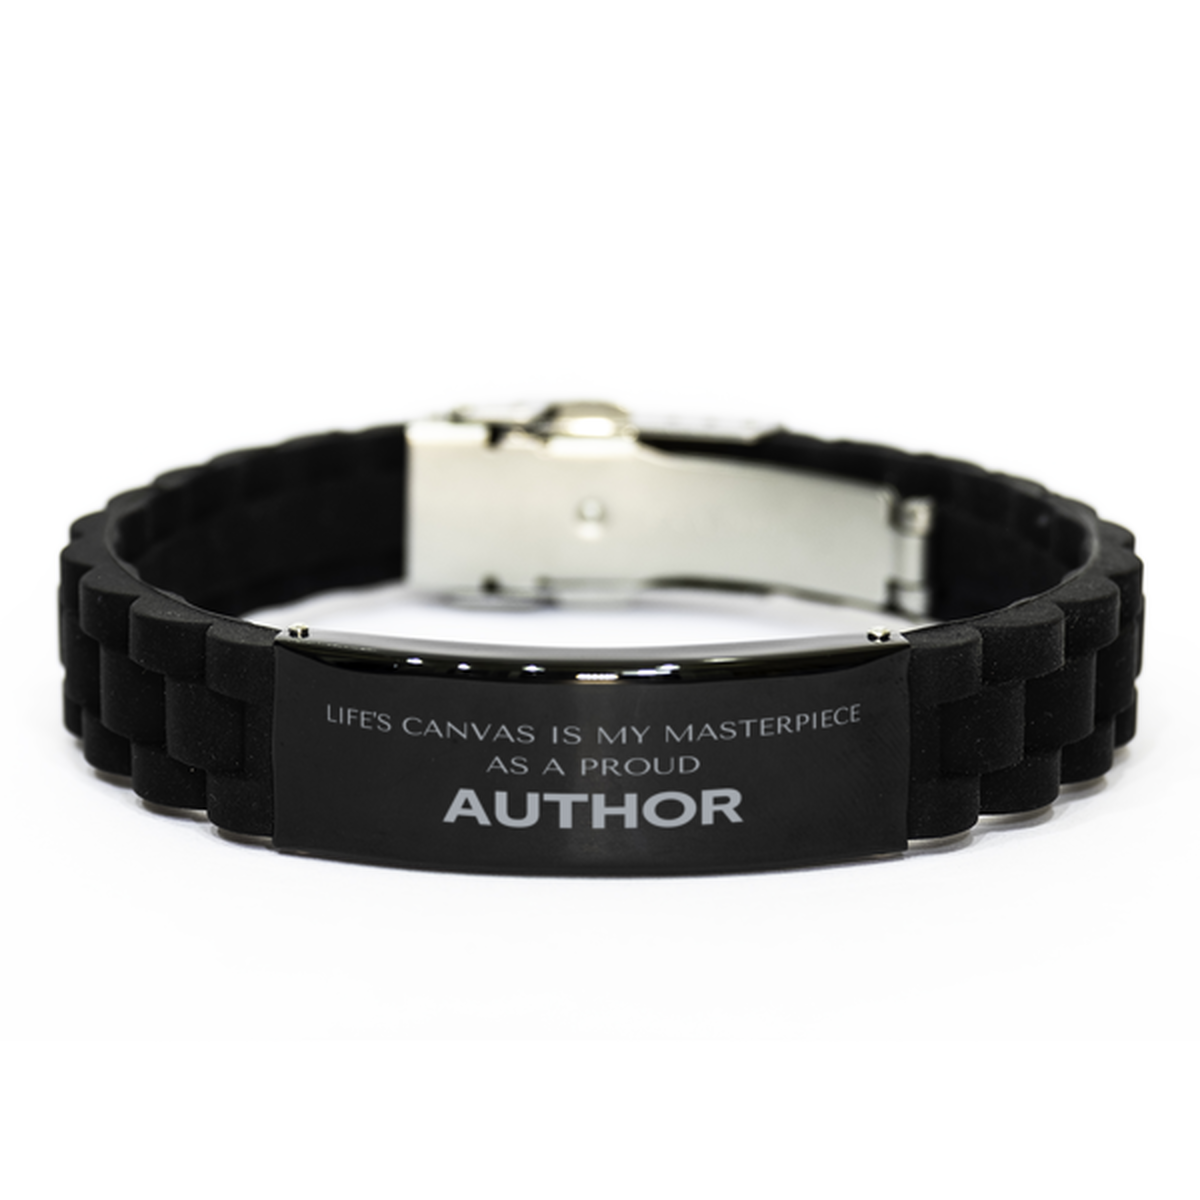 Proud Author Gifts, Life's canvas is my masterpiece, Epic Birthday Christmas Unique Black Glidelock Clasp Bracelet For Author, Coworkers, Men, Women, Friends